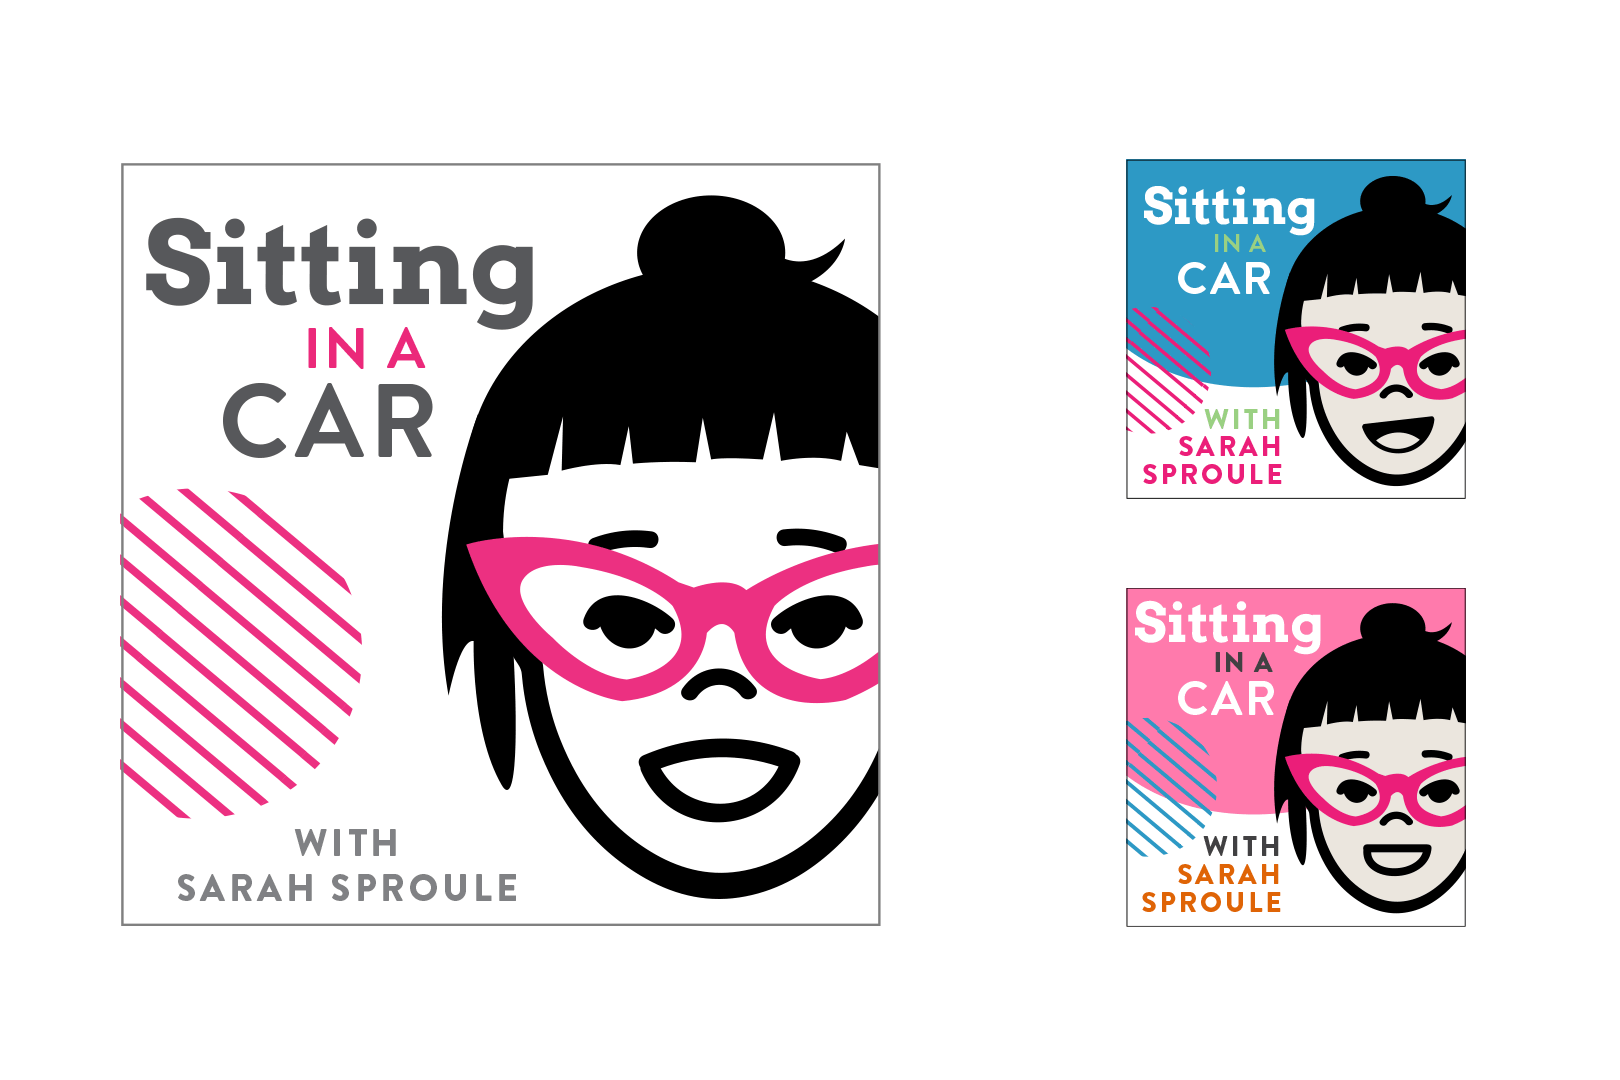 Sitting in a car with Sarah Sproule : sexuality eduaction and support for parents raising confident kids